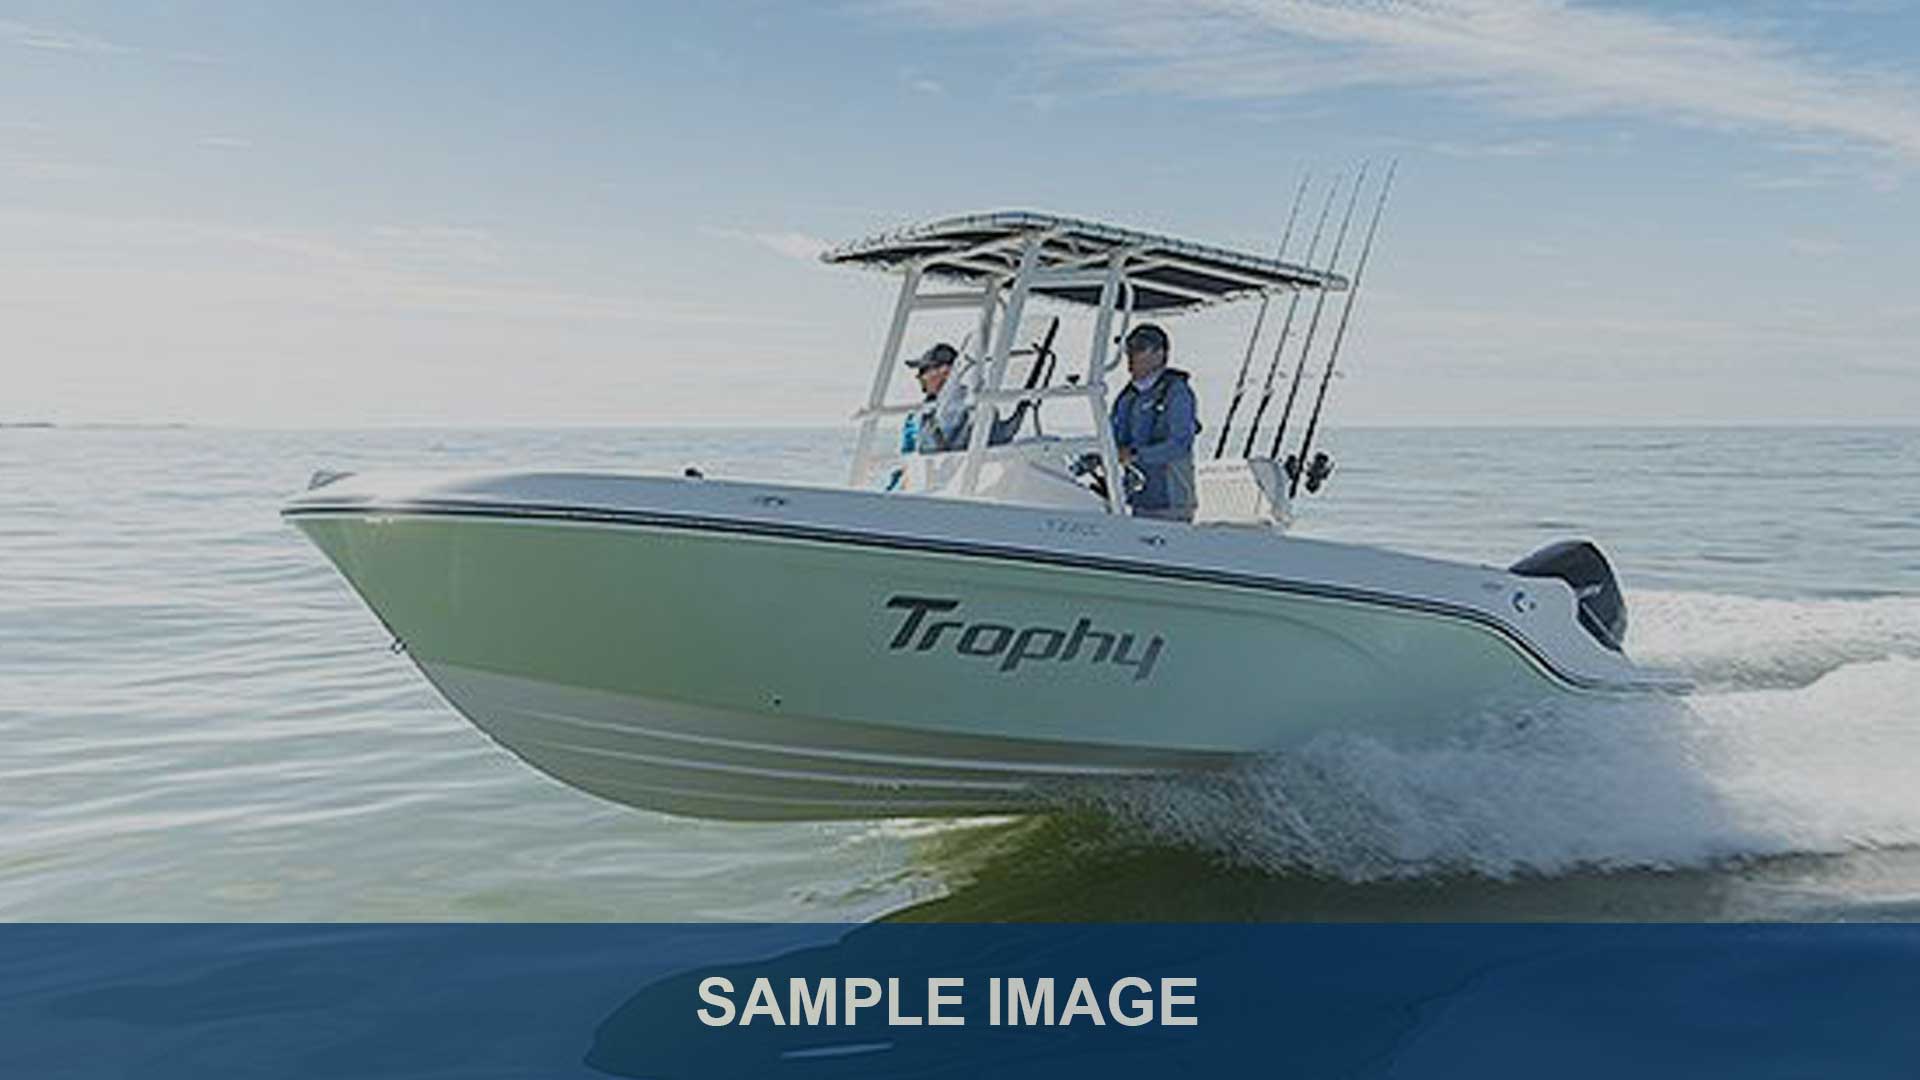 WAVE RIDER (23 FT Bayliner Trophy Center Console - 150 HP~Fishing)